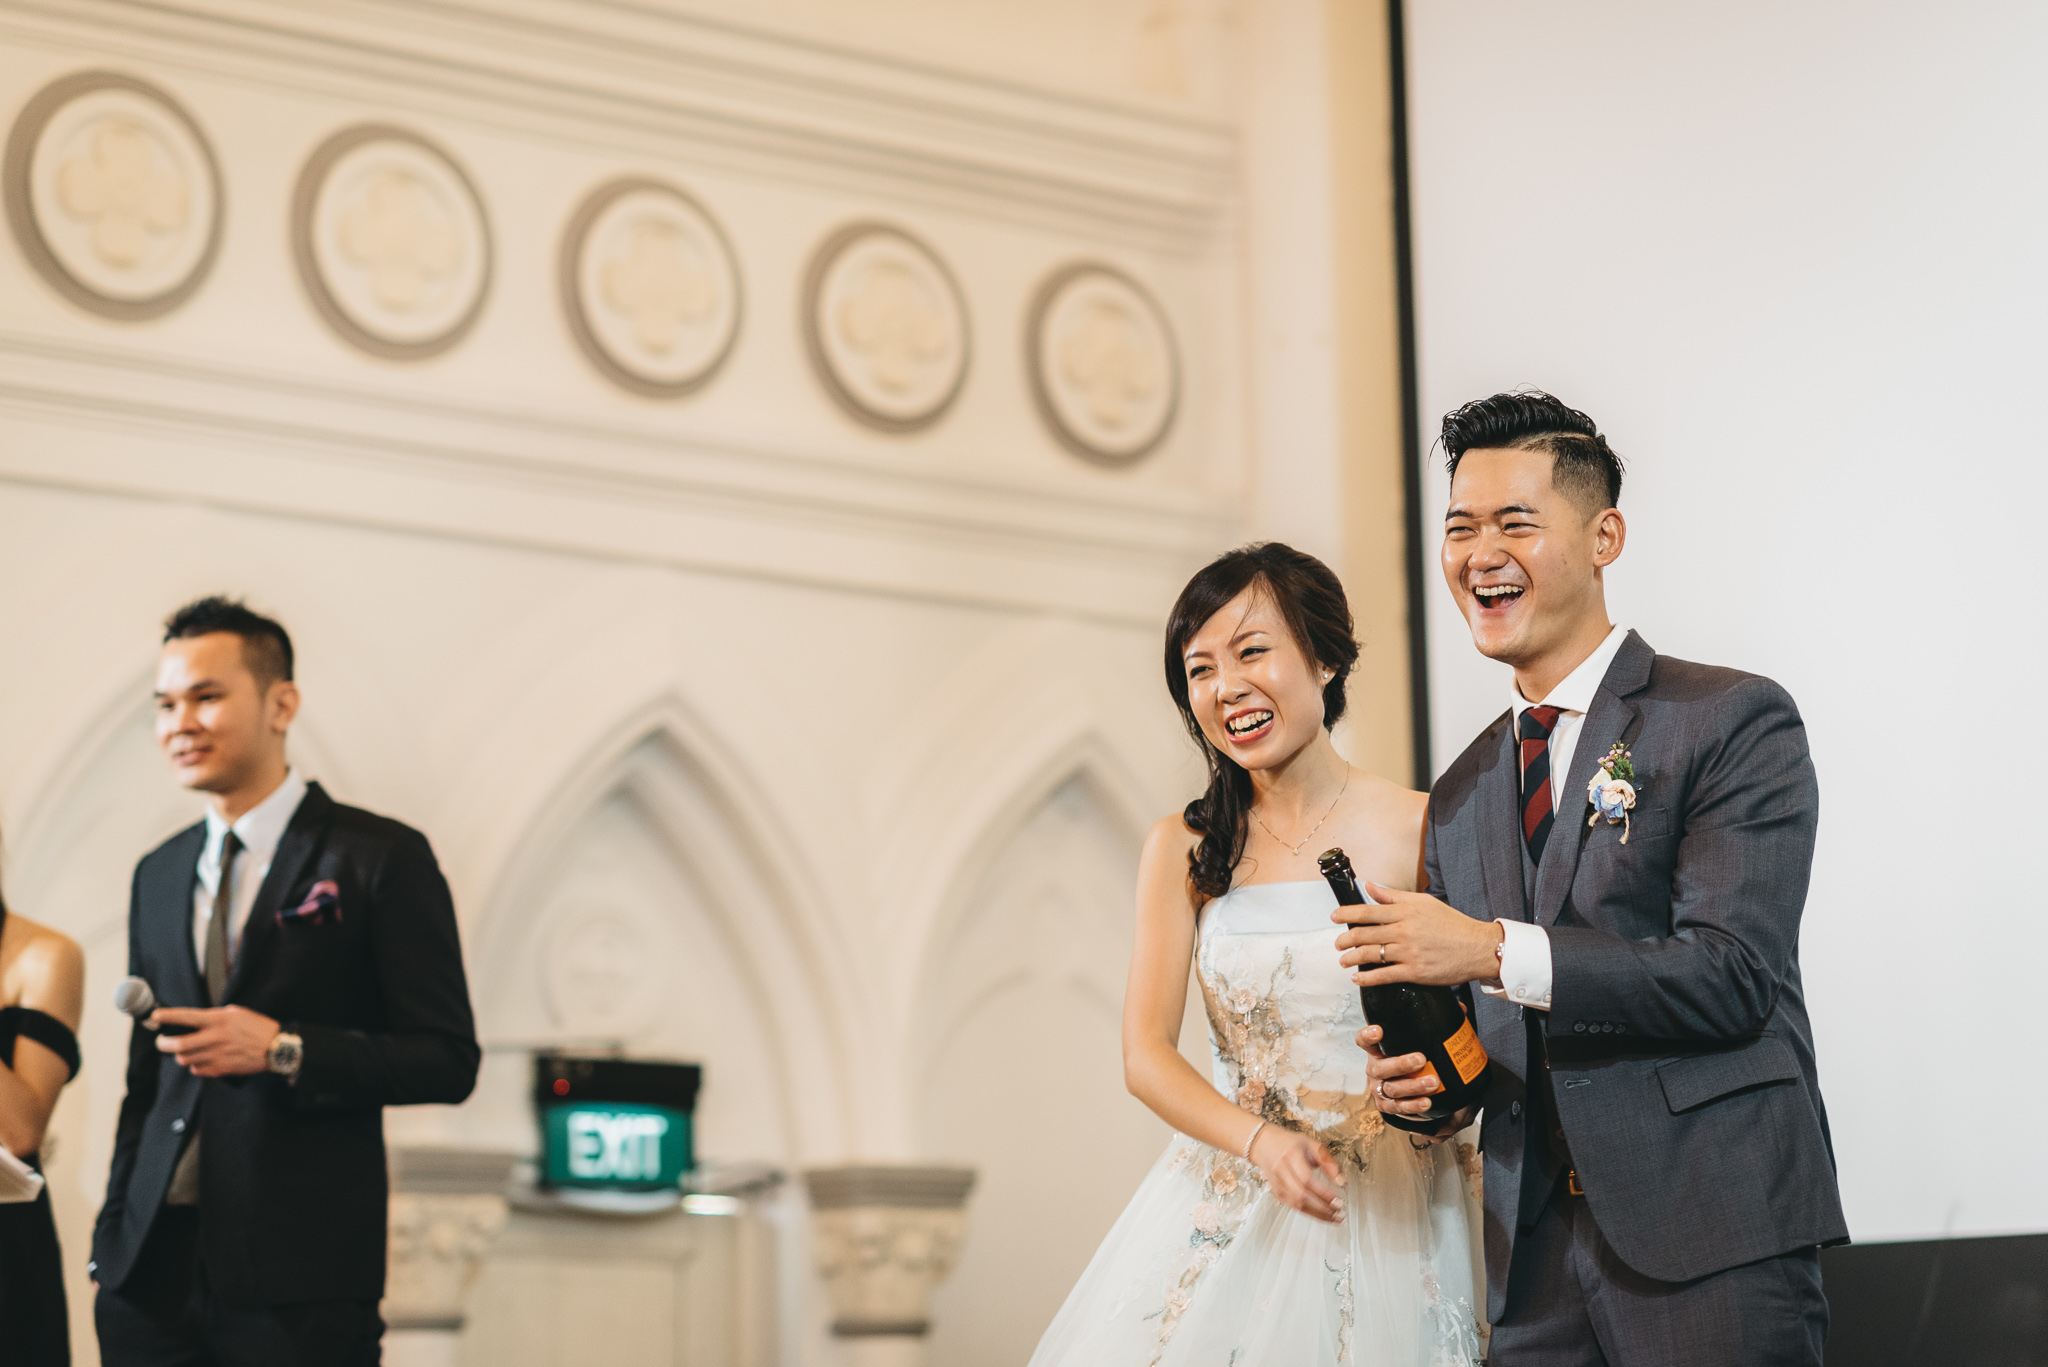 Alice & Wei Bang Wedding Day Highlights (resized for sharing) - 105.jpg